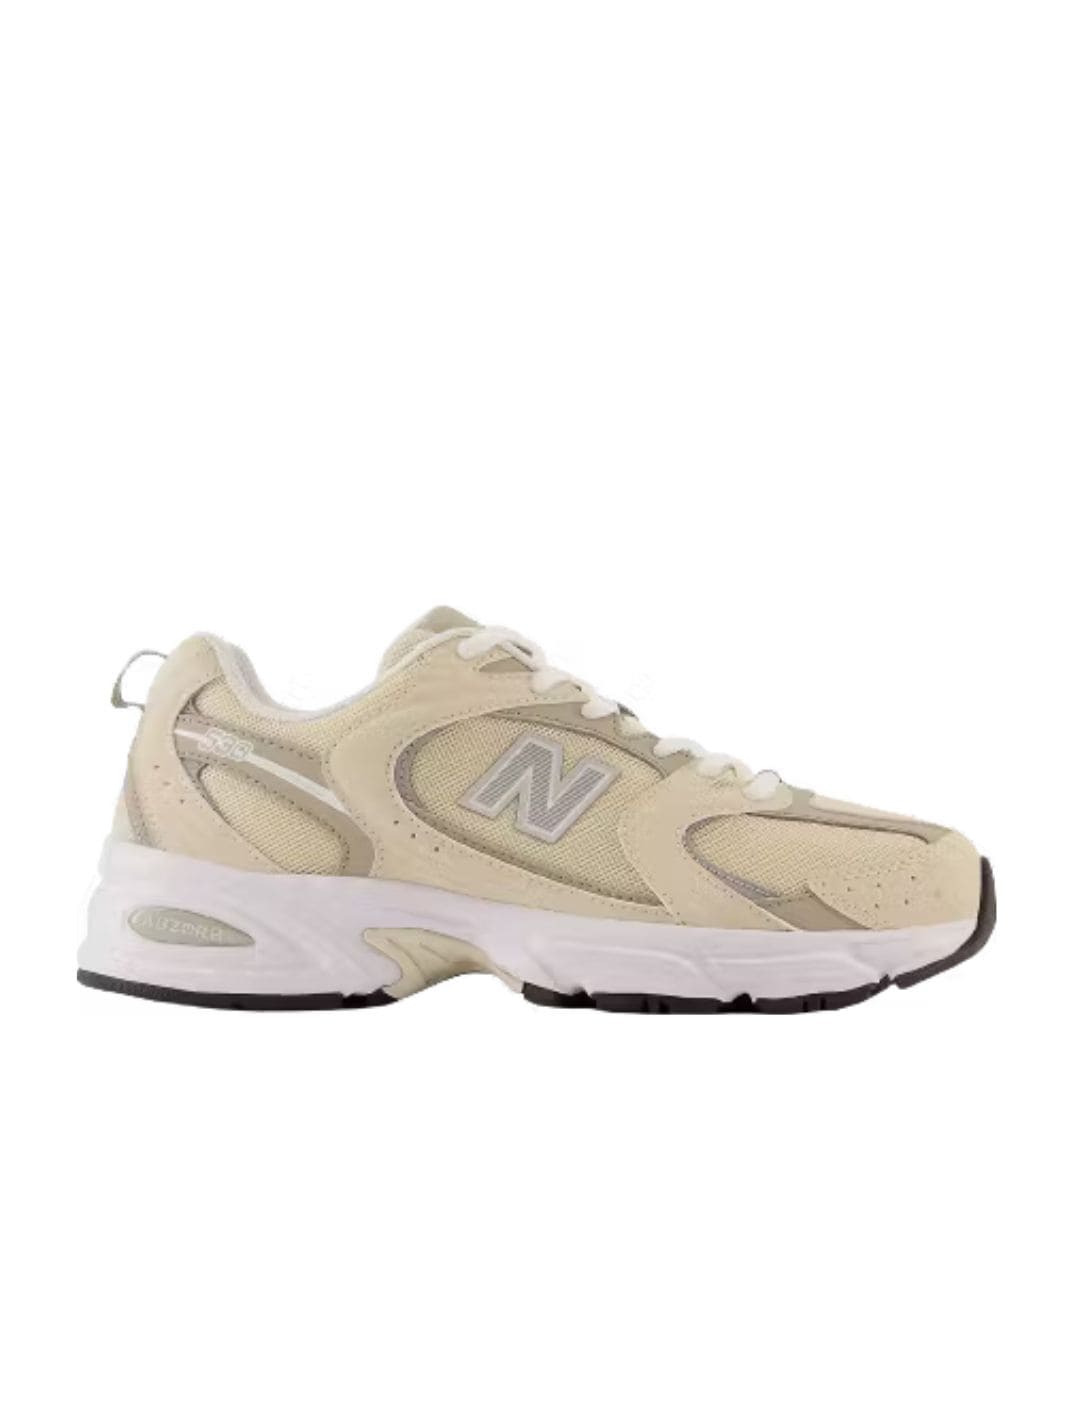 New Balance Shoes Sneakers | MR530SMD